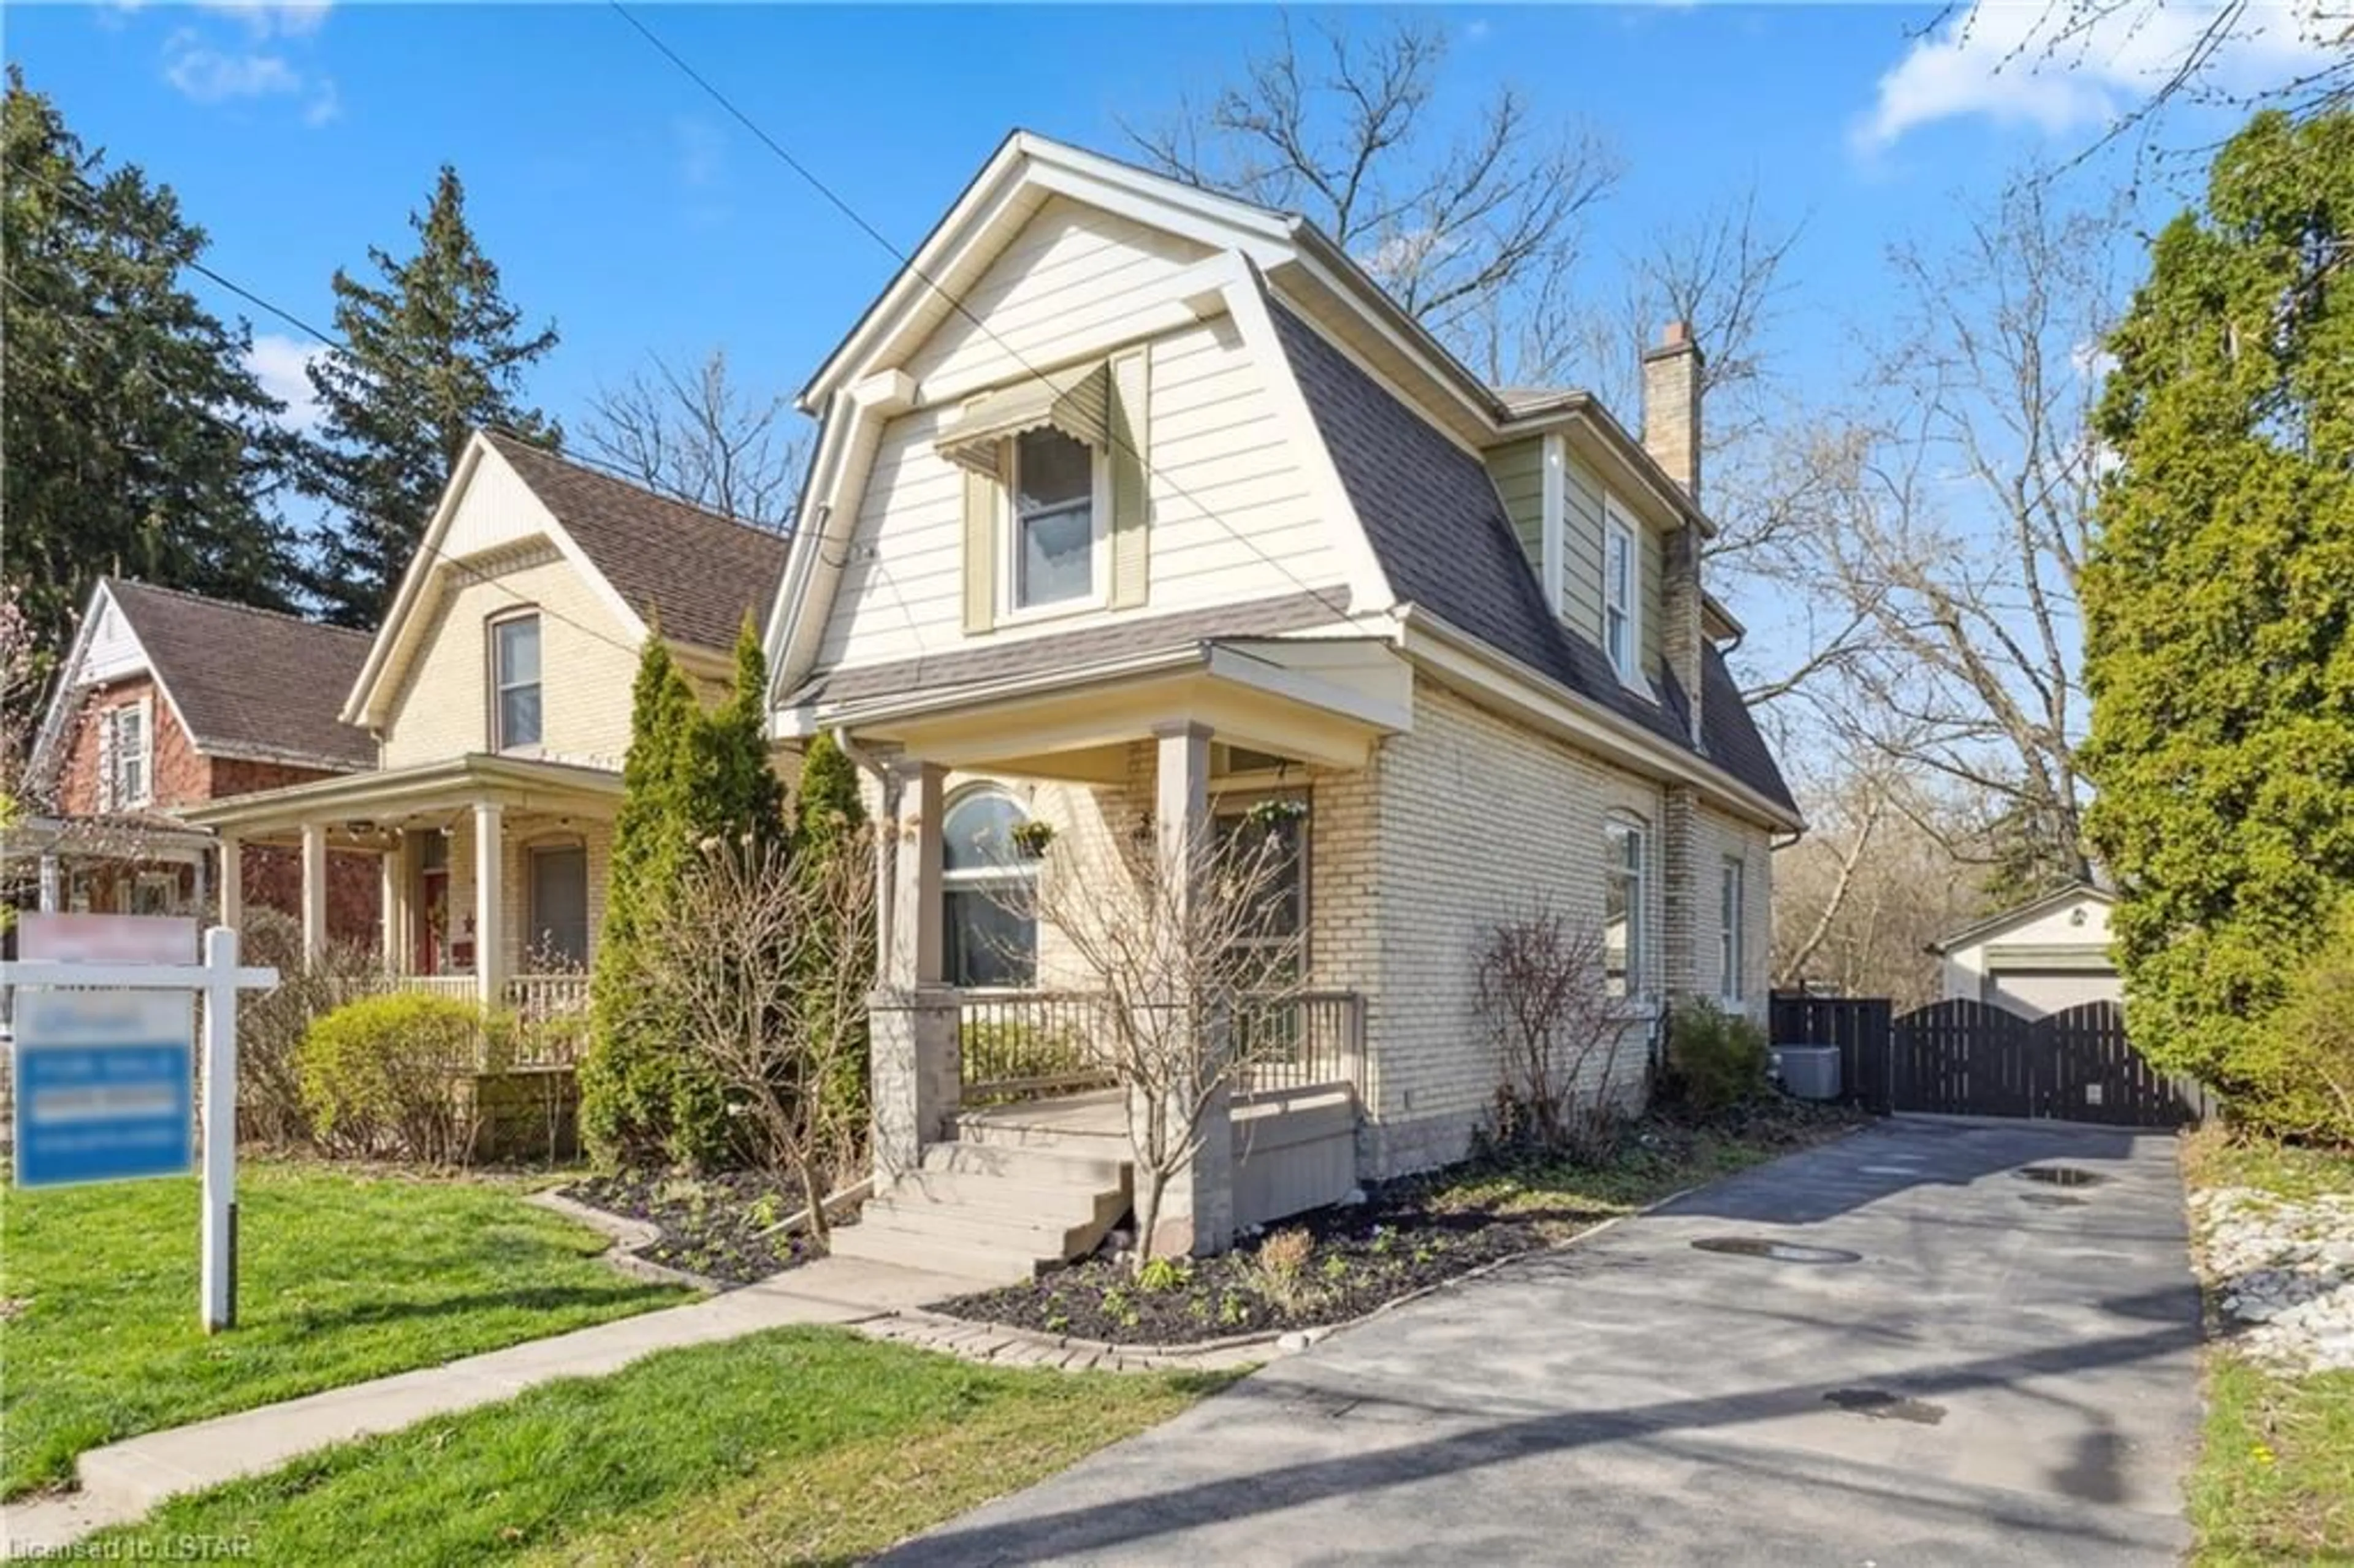 Frontside or backside of a home for 123 Cathcart St, London Ontario N6C 3M2